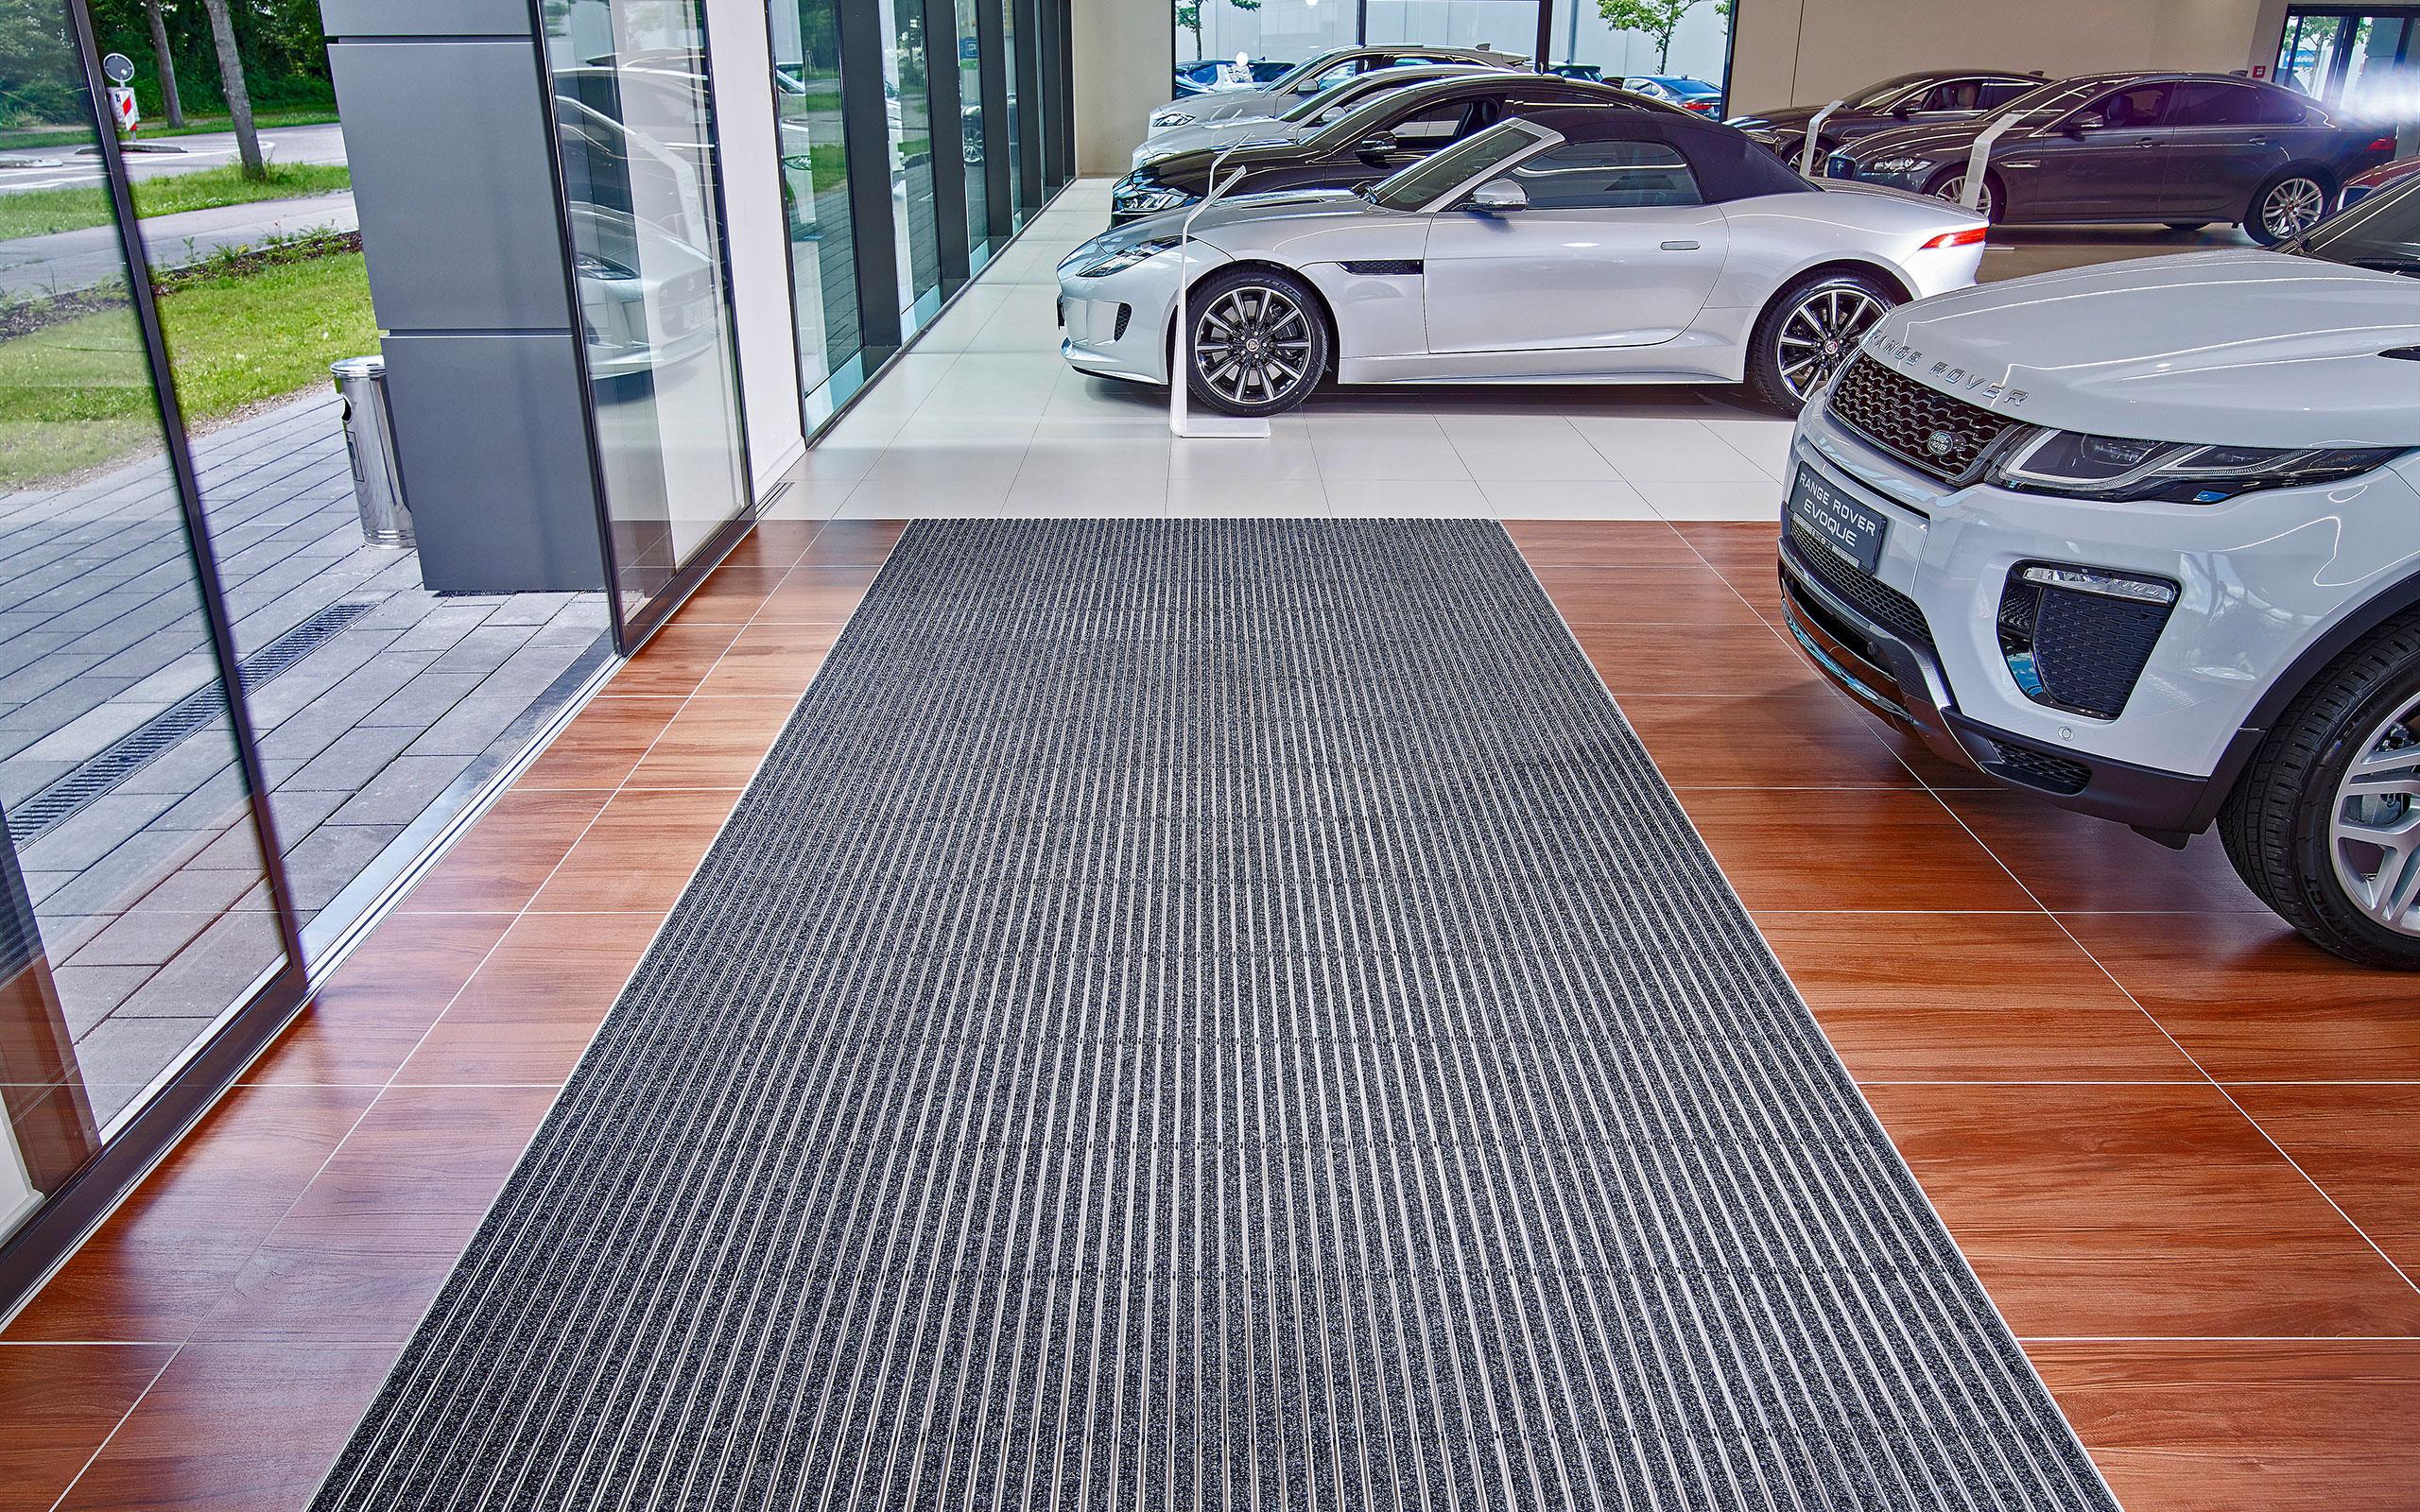 Showroom and Dealership Entrance Matting from GEGGUS